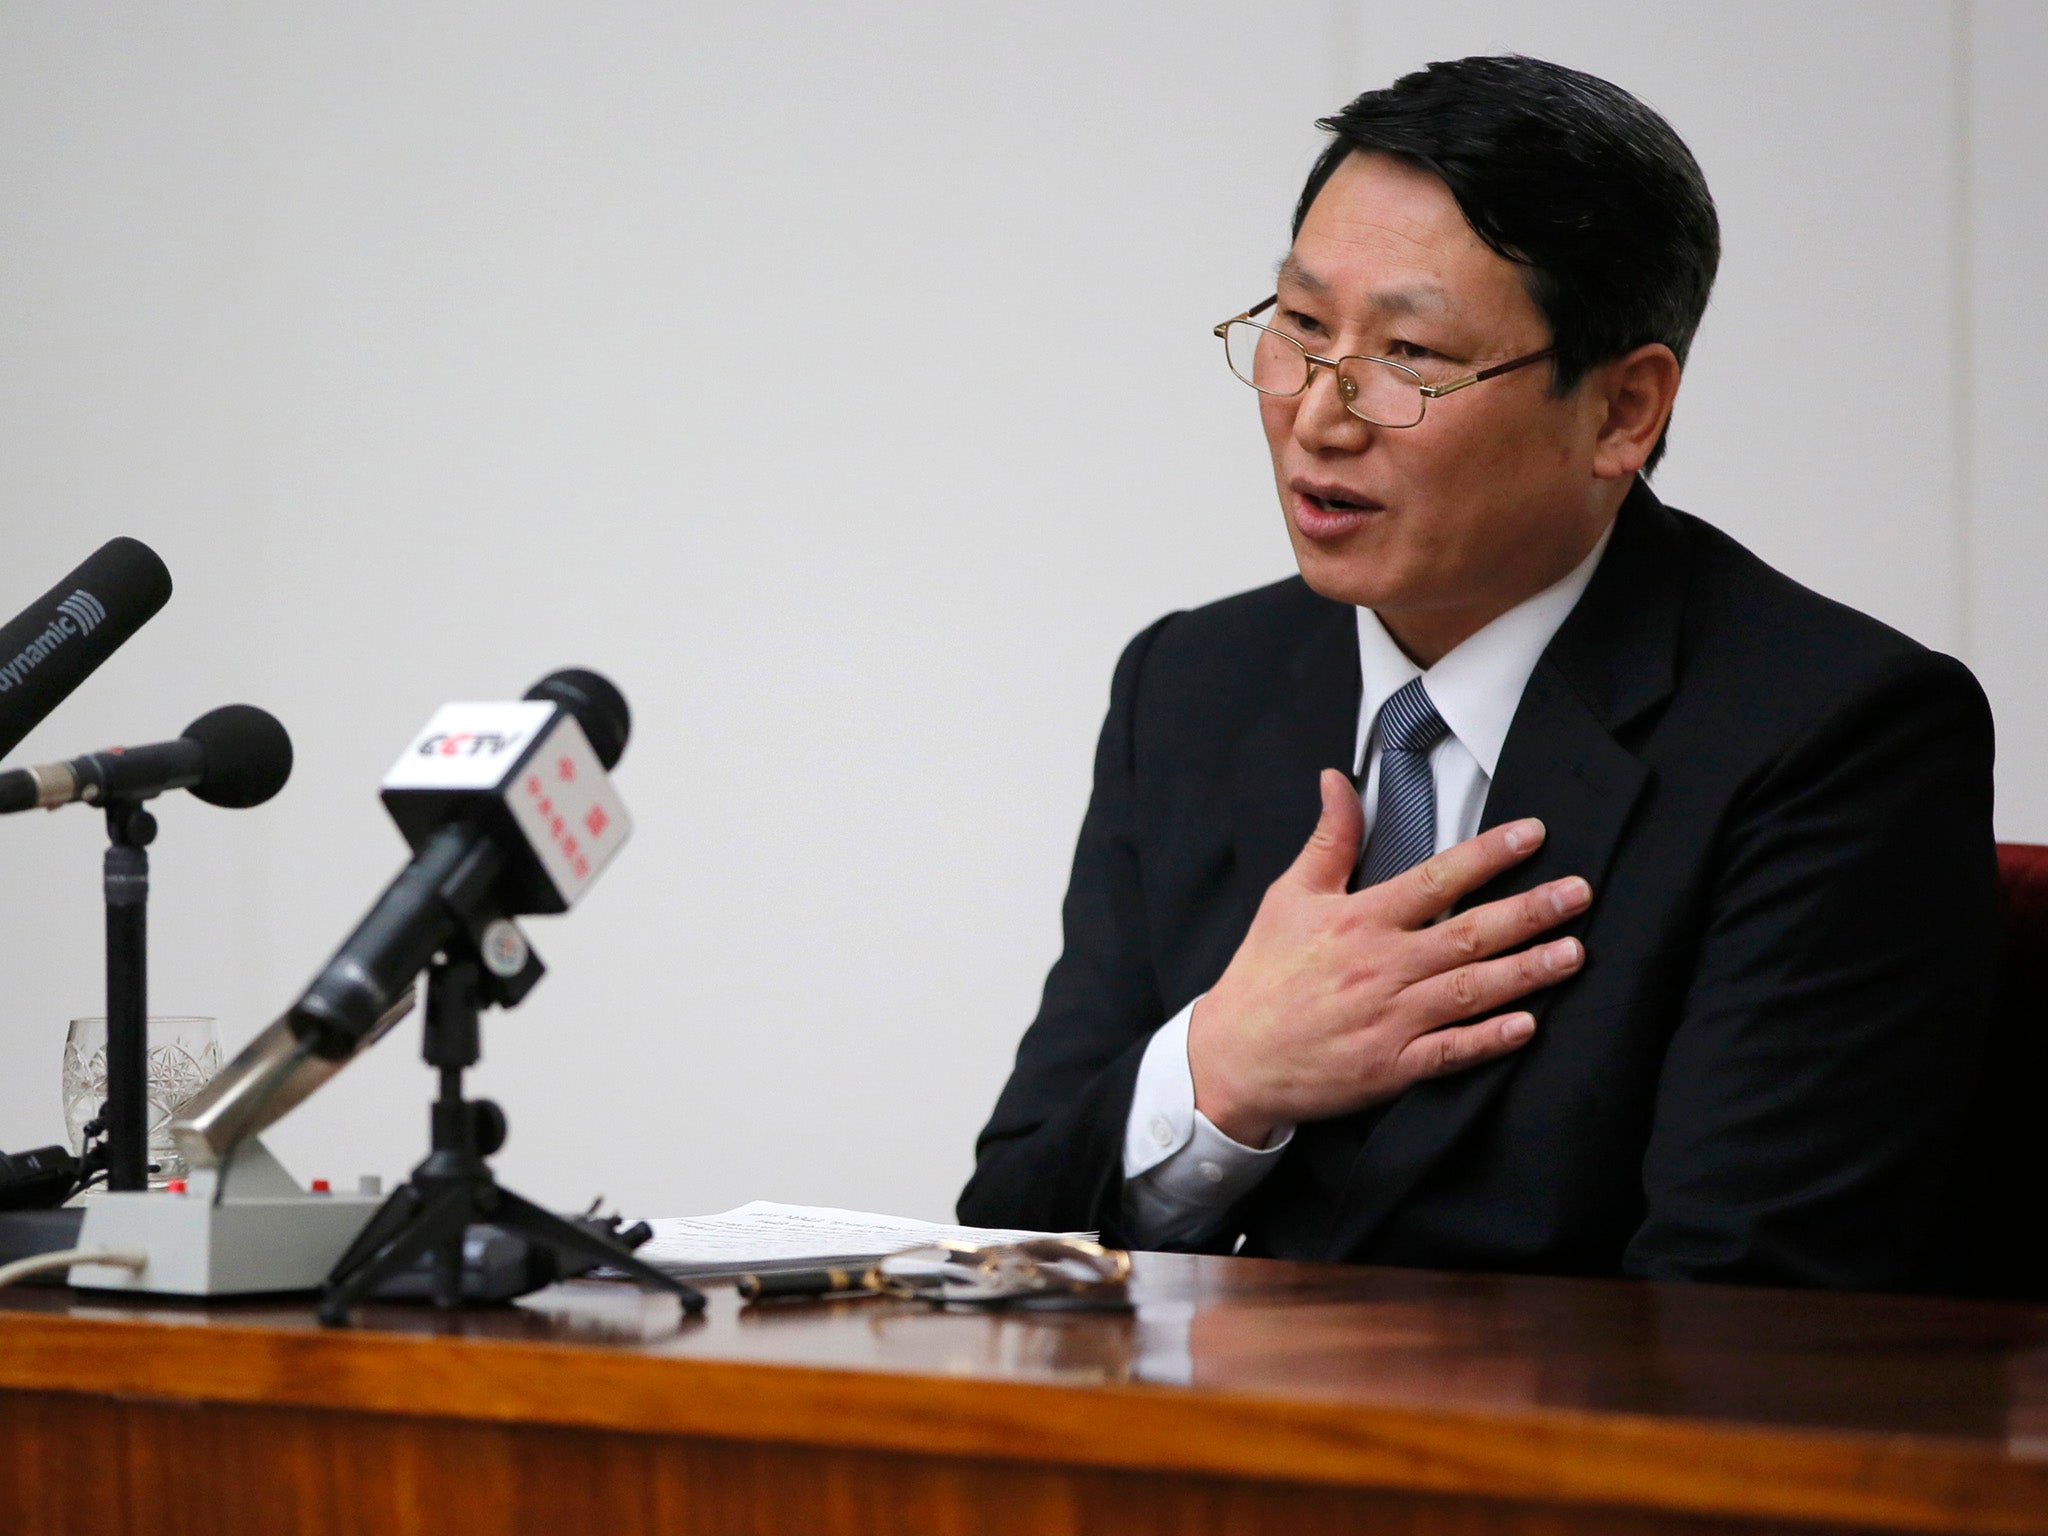 Kim Jung Wook speaks during a news conference in Pyongyang, North Korea in February.